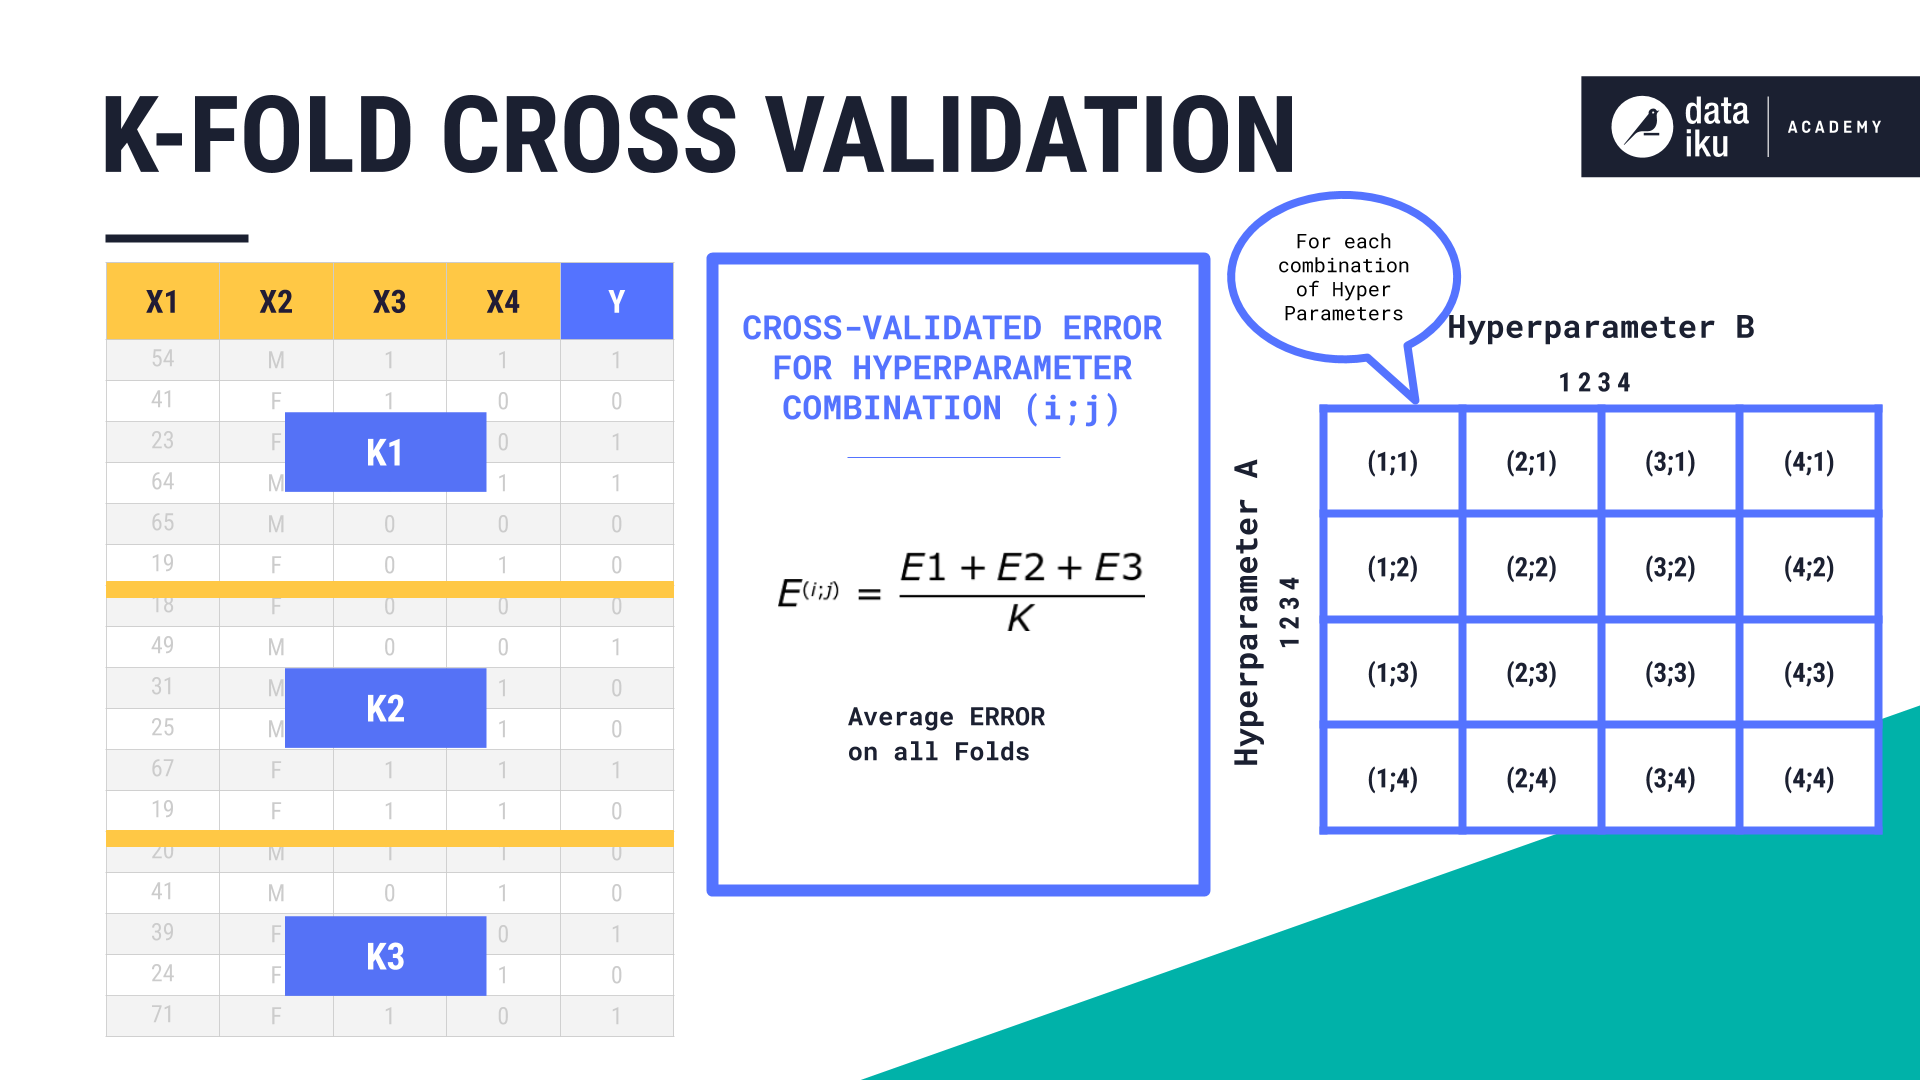 Cross-valided error for each combination of hyperparameters.